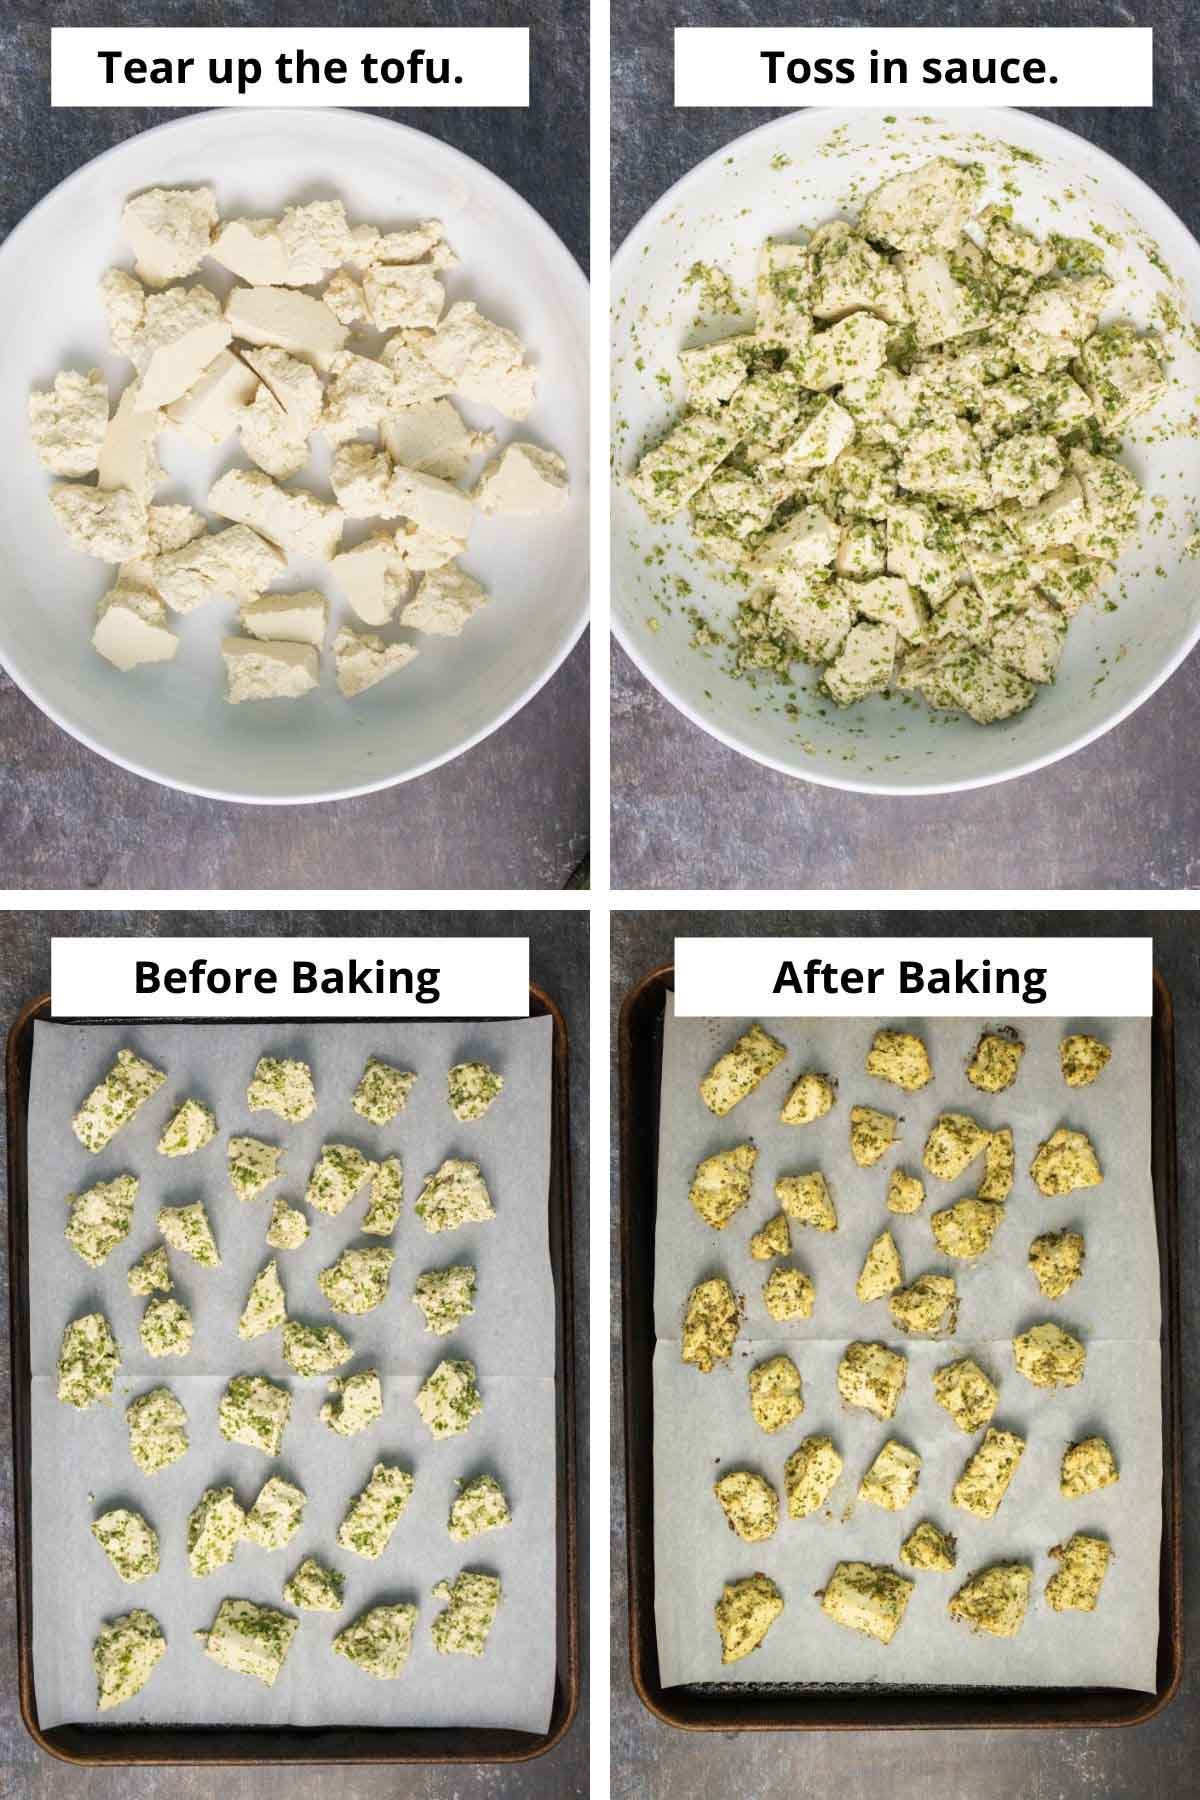 image collage showing the tofu pieces before and after adding sauce and before and after baking